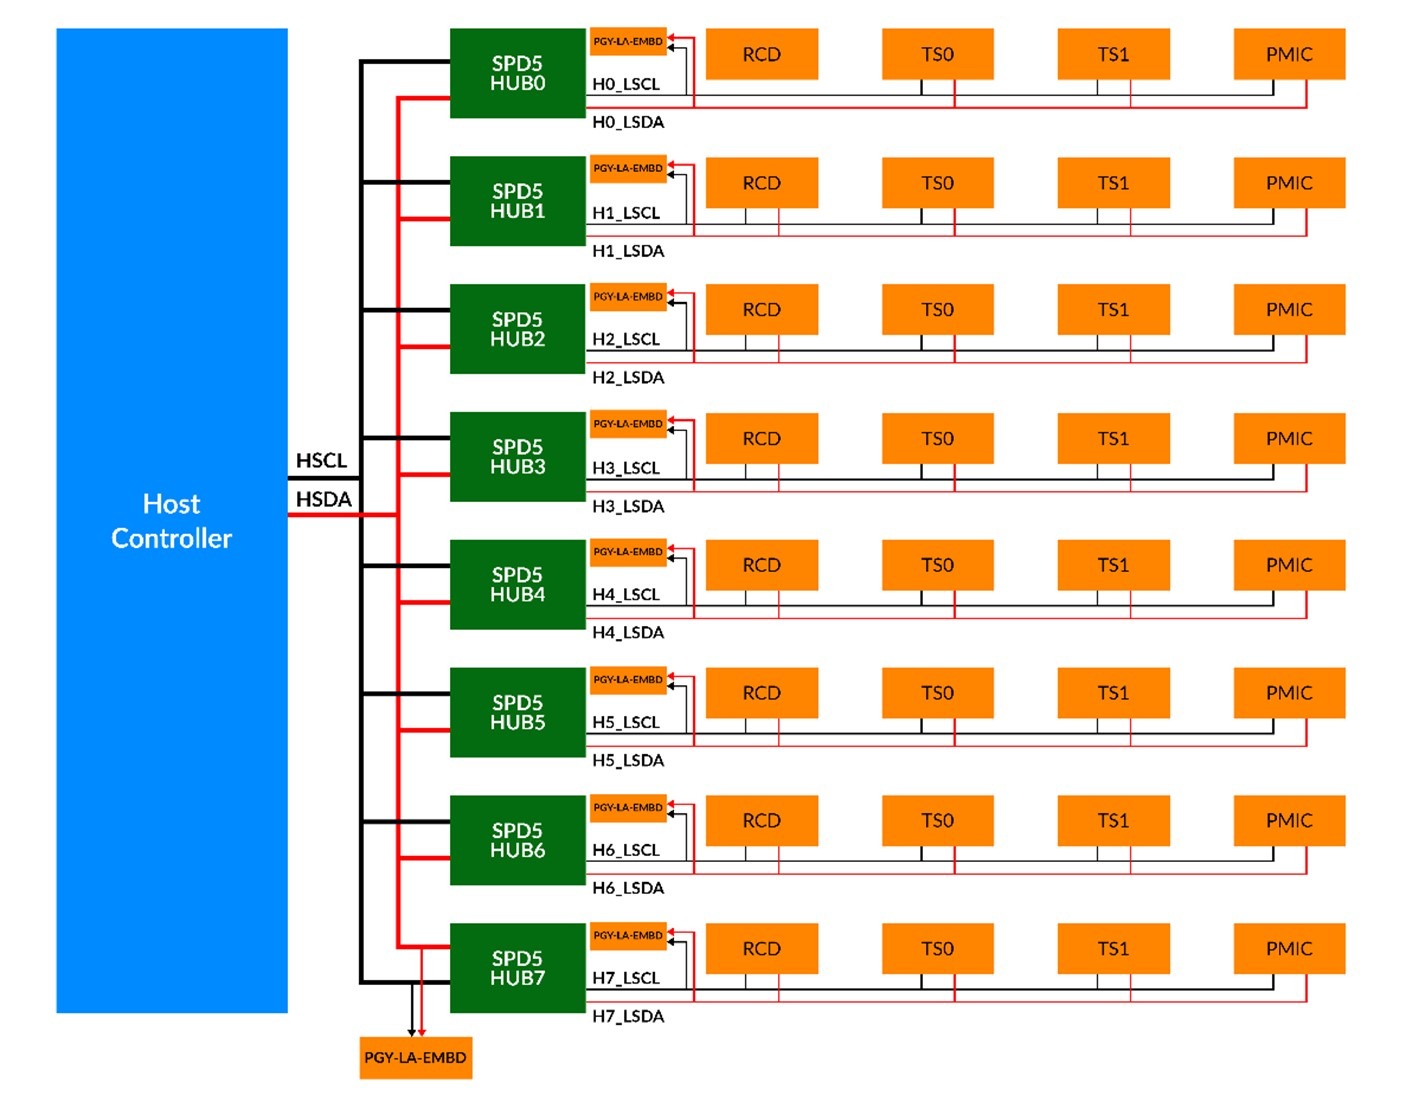 Multi I3C bus decoding for Serial Presence Detect (SPD) in DDR5